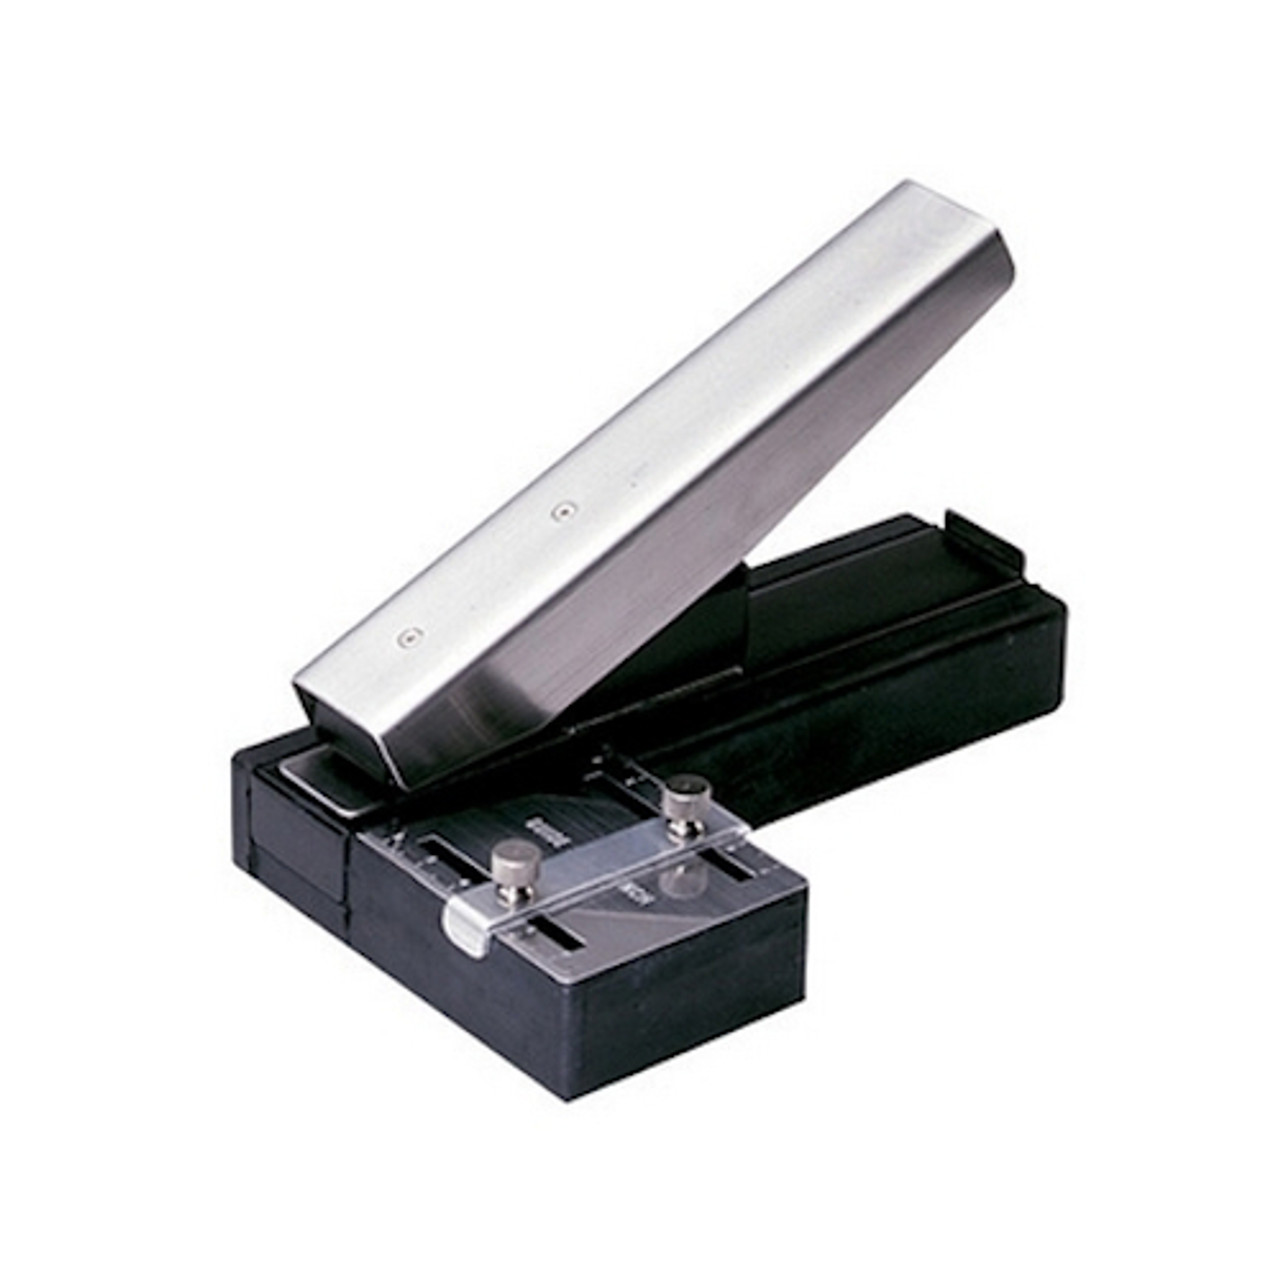 3943-1000 Hand-Held Slot Punch - ProxCards